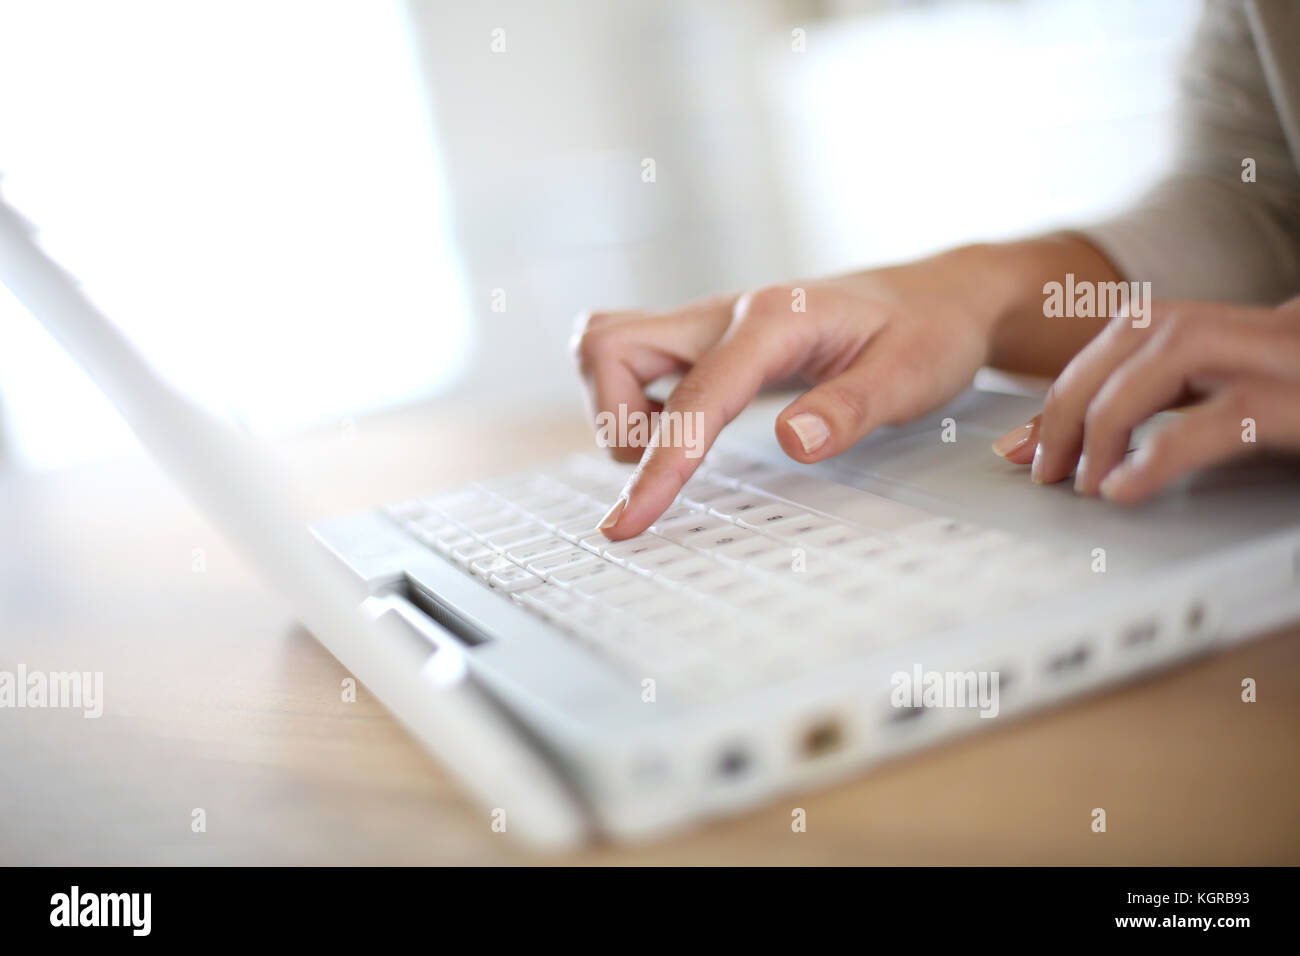 Woman's hand typing on laptop keyboard Stock Photo